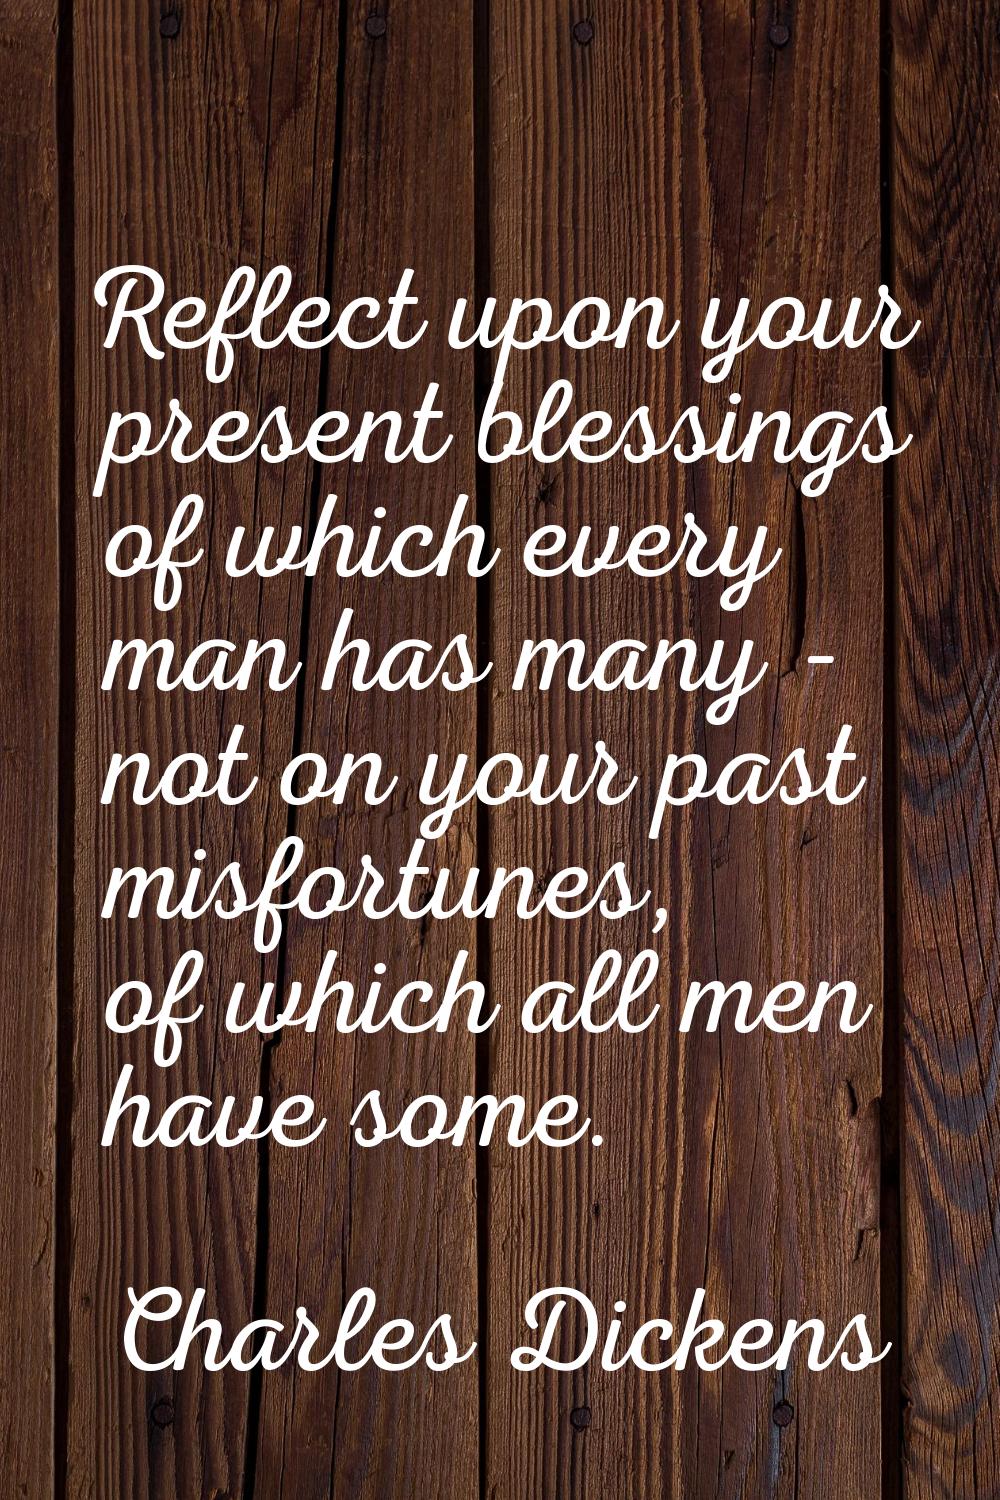 Reflect upon your present blessings of which every man has many - not on your past misfortunes, of 